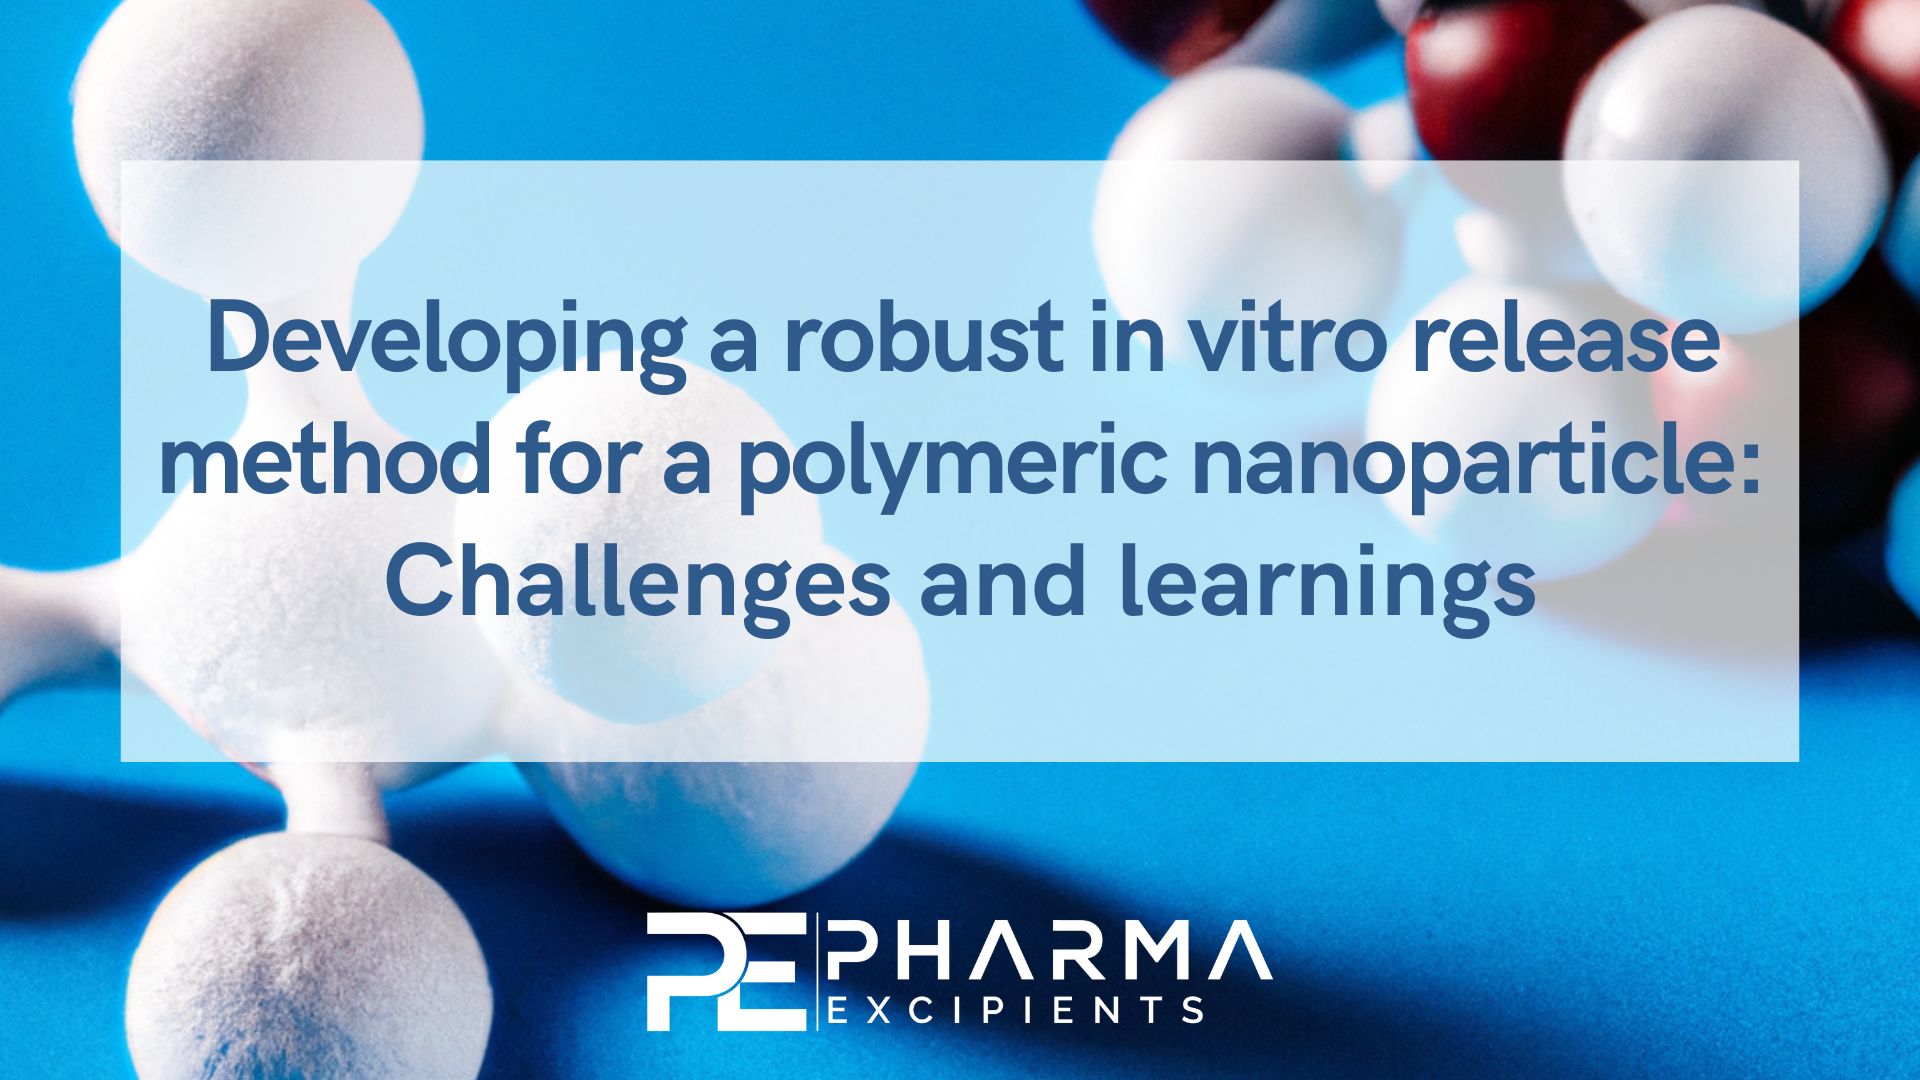 Developing a robust in vitro release method for a polymeric nanoparticle: Challenges and learnings